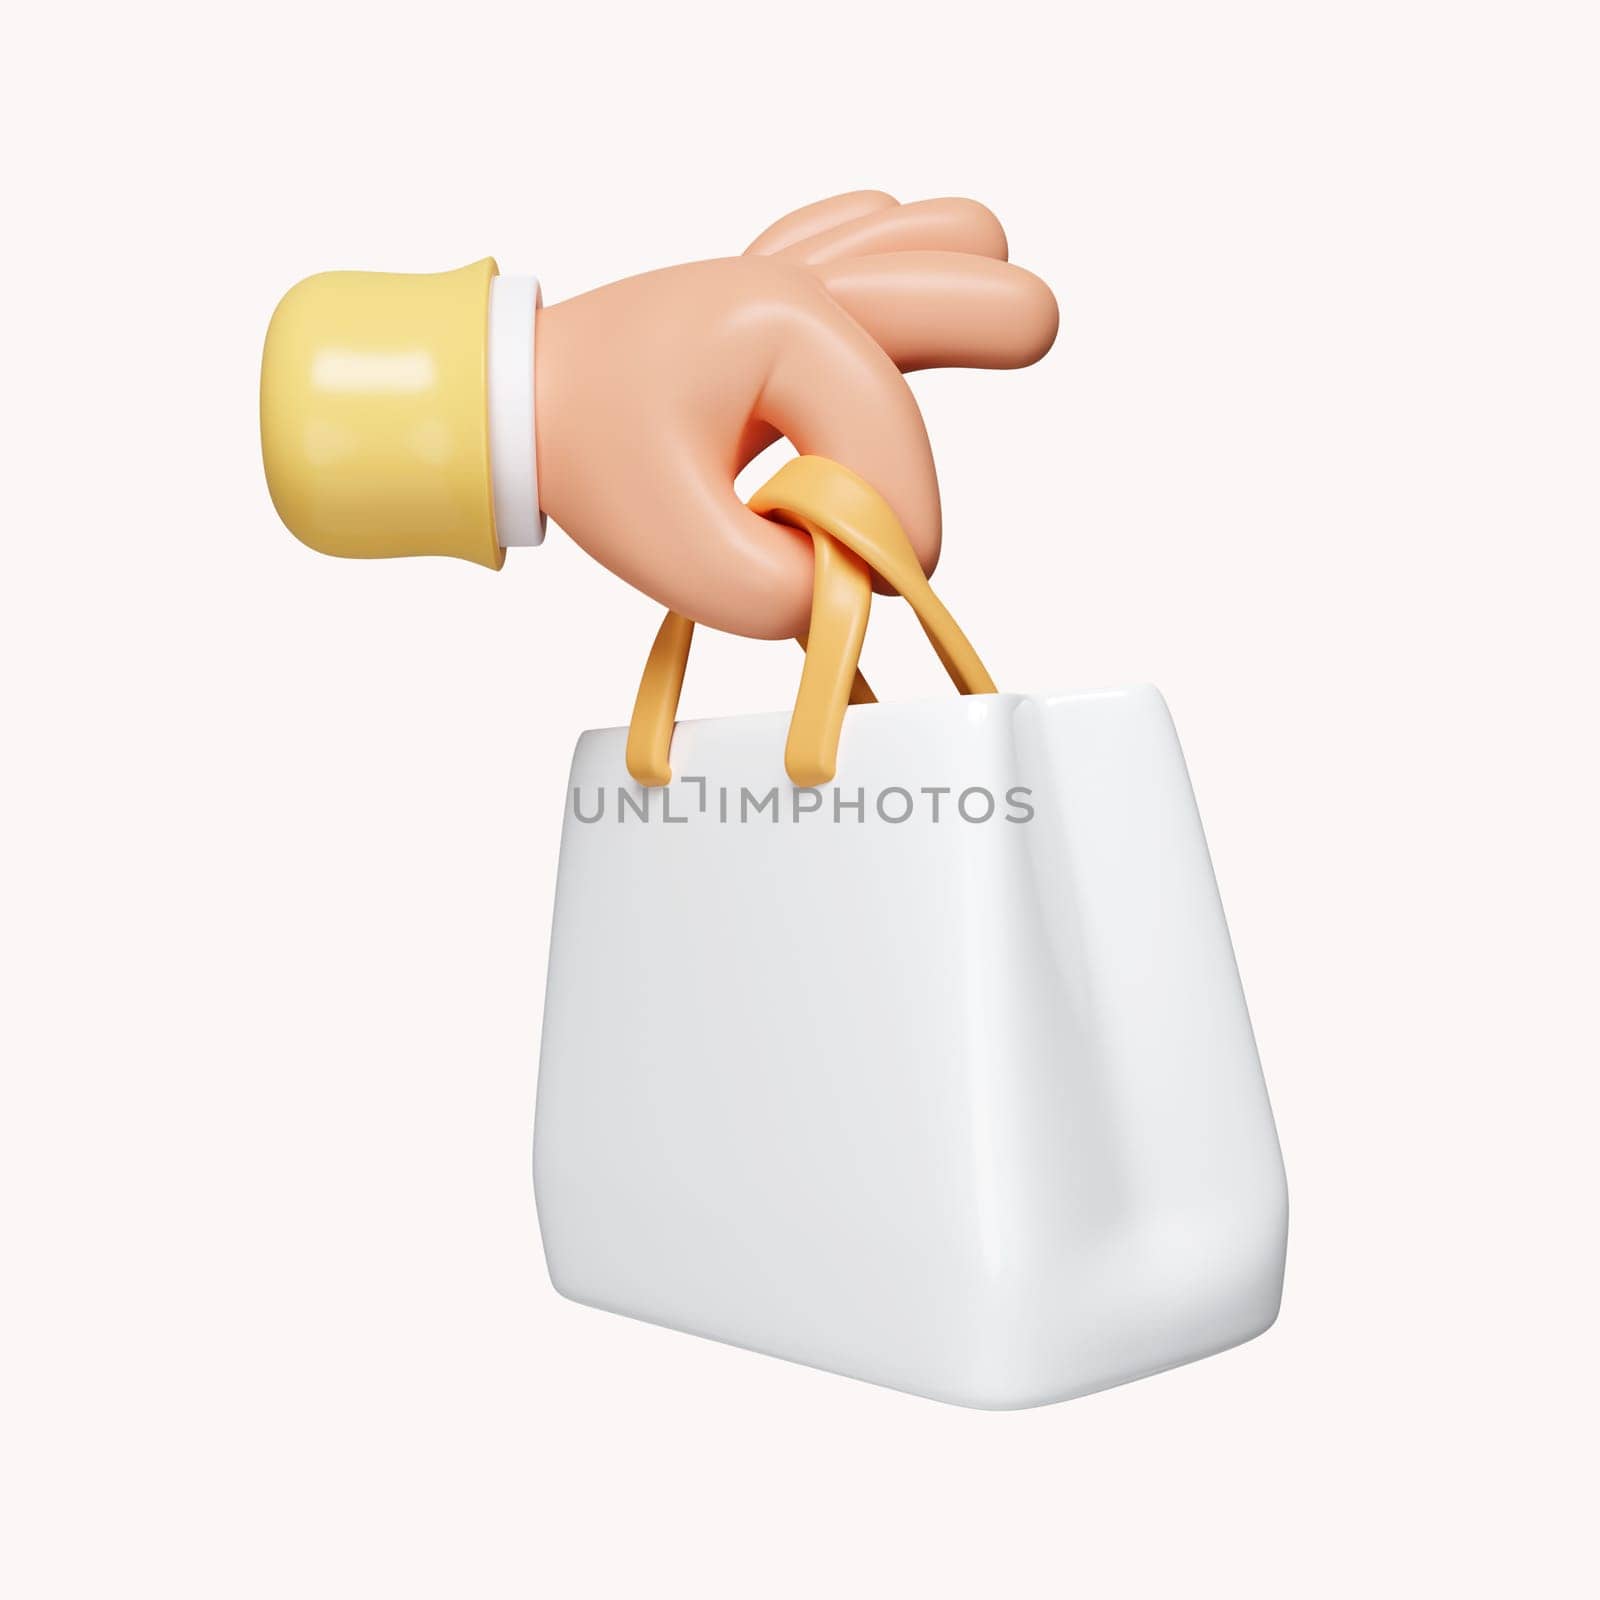 3d Hand holding shopping bag. online shopping. sale promotion. Shopping and season sale concept. icon isolated on white background. 3d rendering illustration. Clipping path..